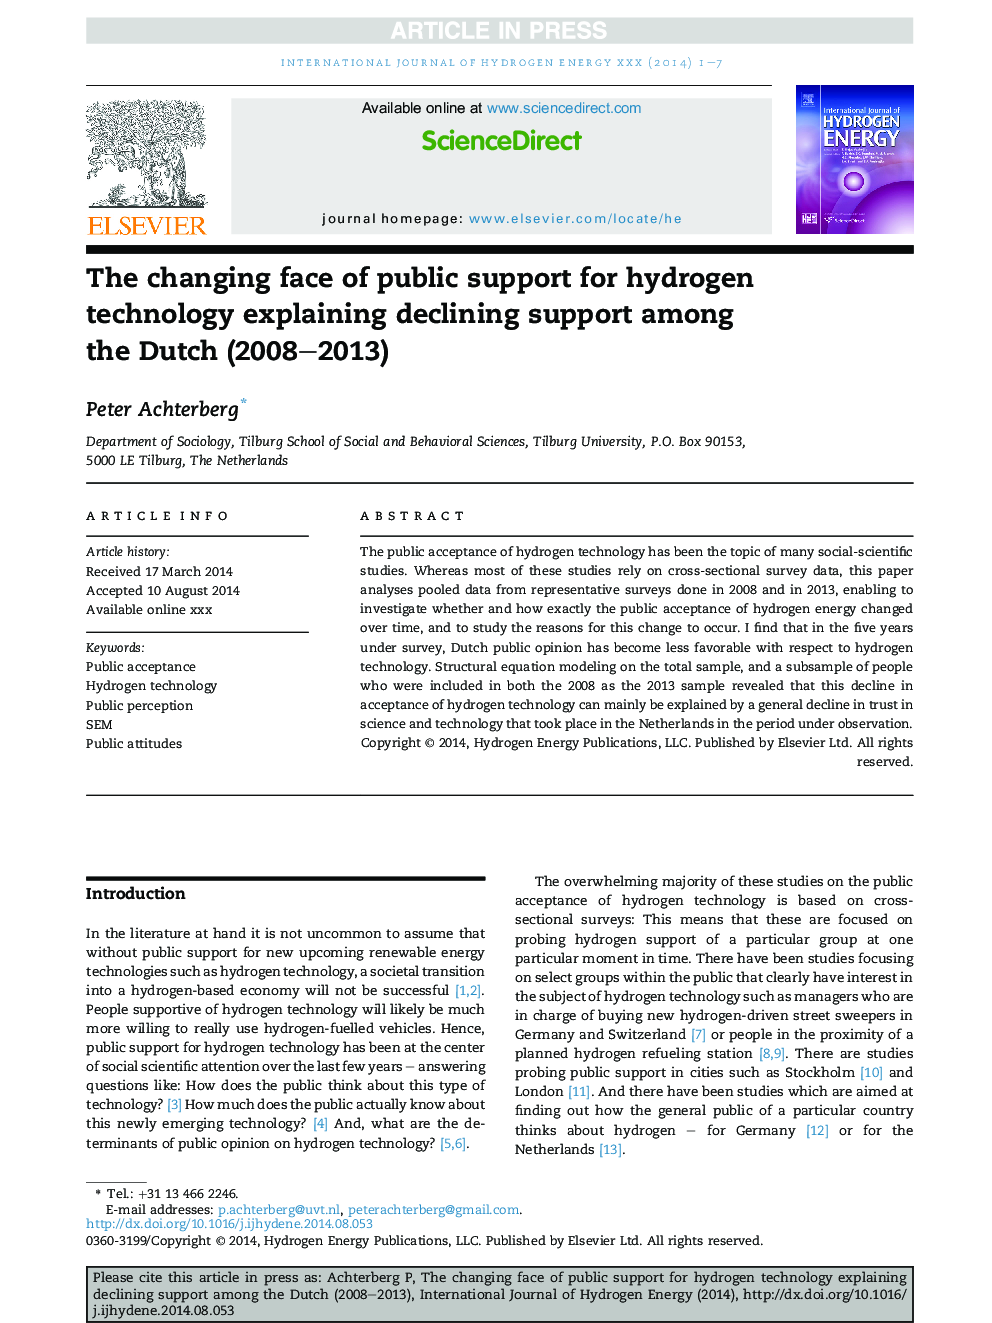 The changing face of public support for hydrogen technology explaining declining support among the Dutch (2008-2013)